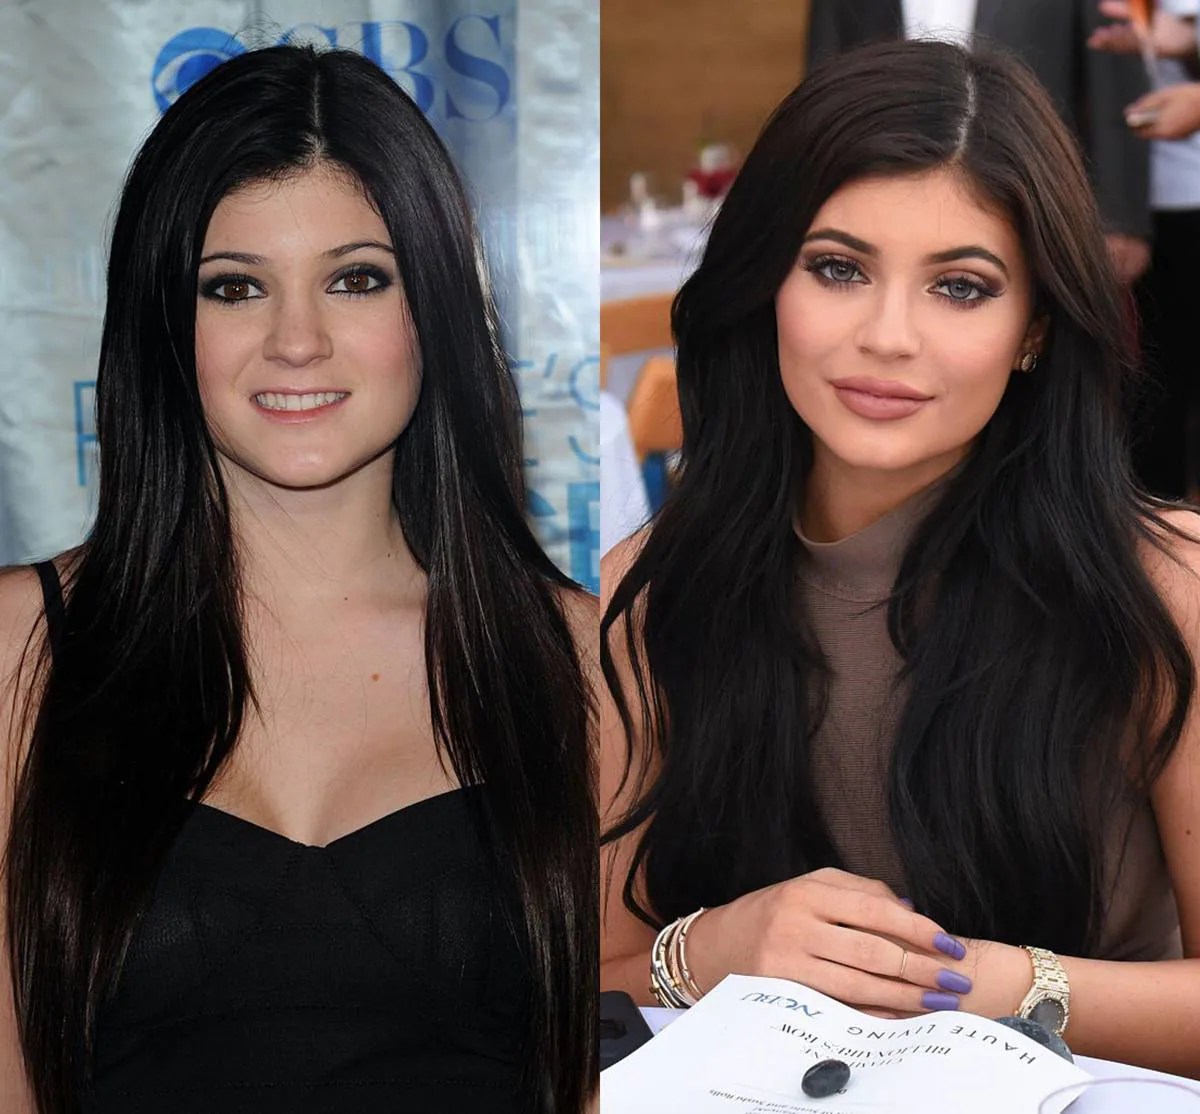 Fans shocked by changing face of Kylie Jenner NZ Herald